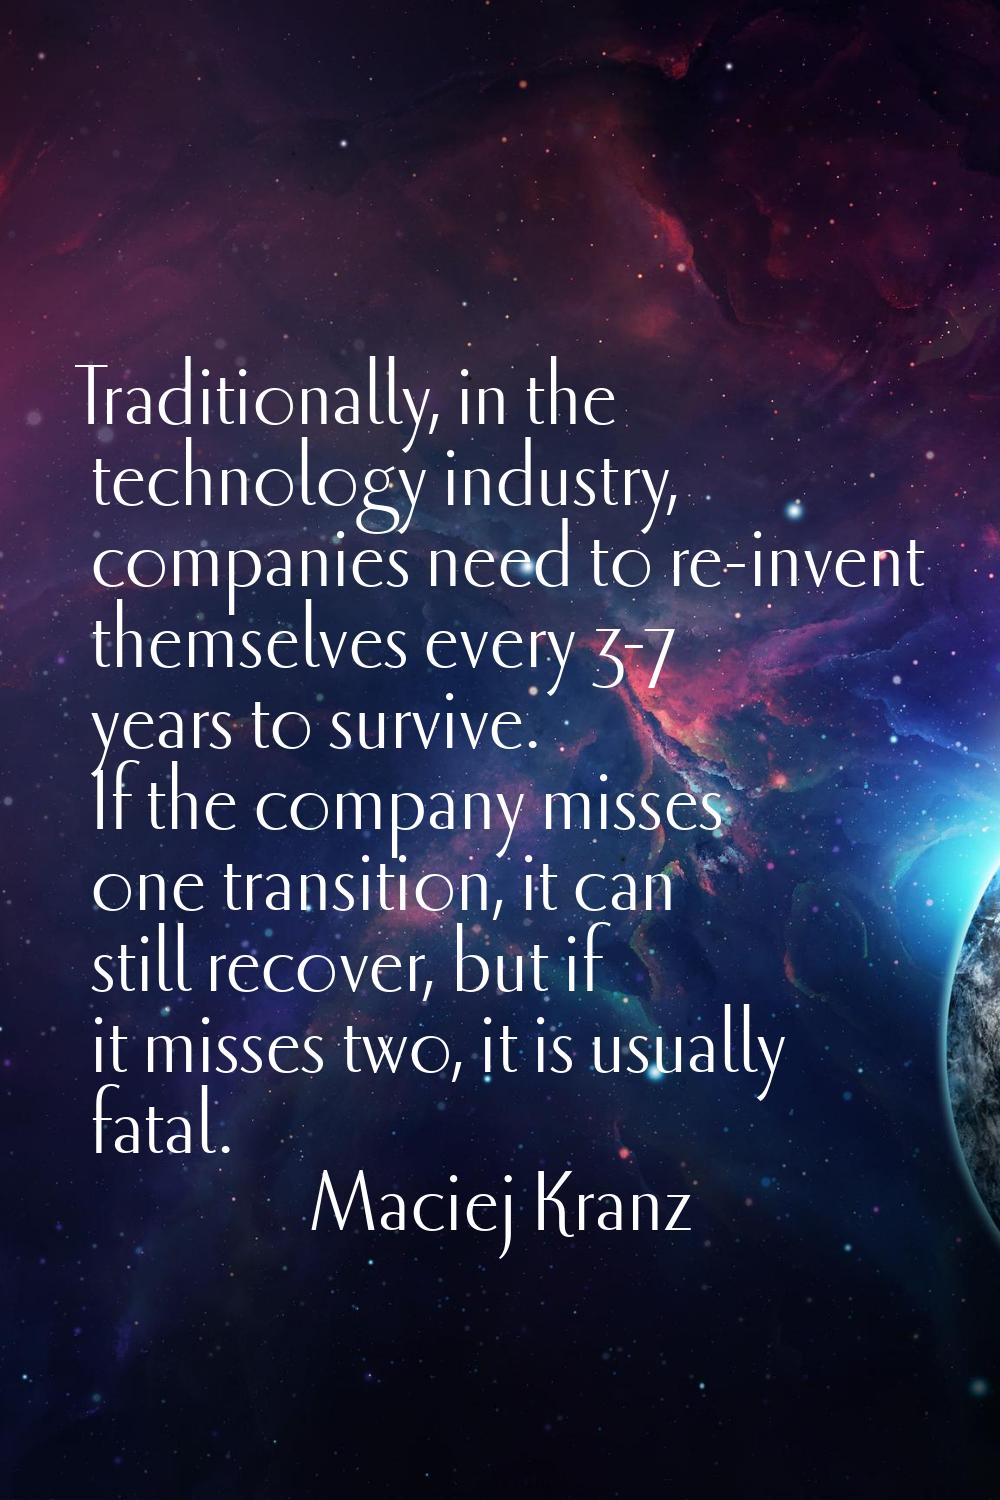 Traditionally, in the technology industry, companies need to re-invent themselves every 3-7 years t